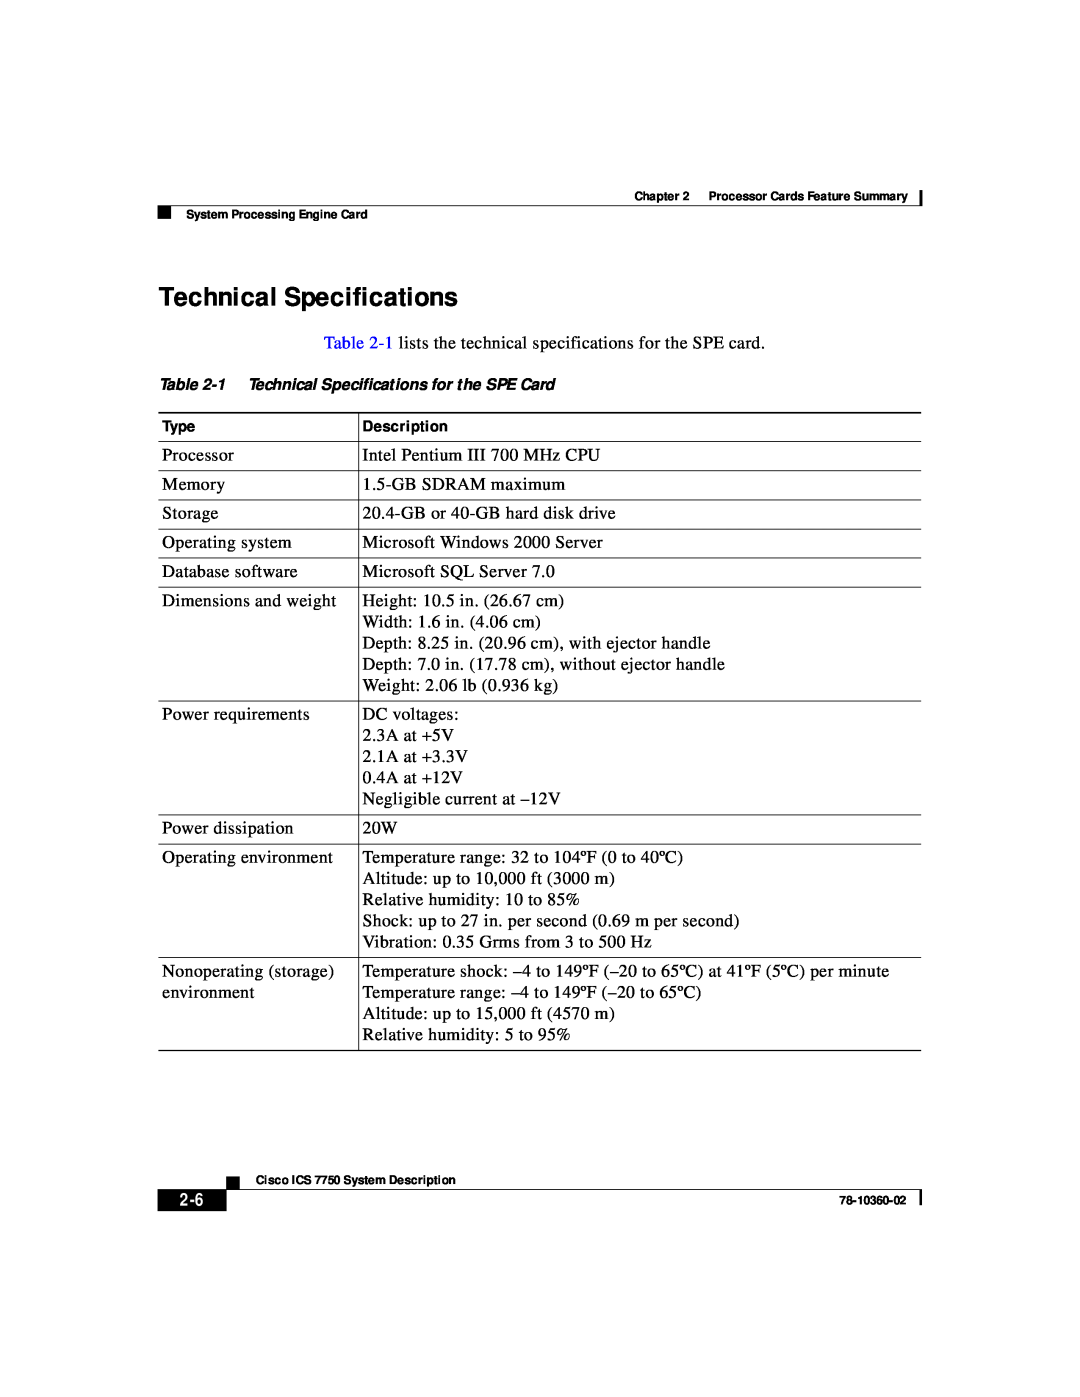 Cisco Systems ICS-7750 manual Technical Specifications 